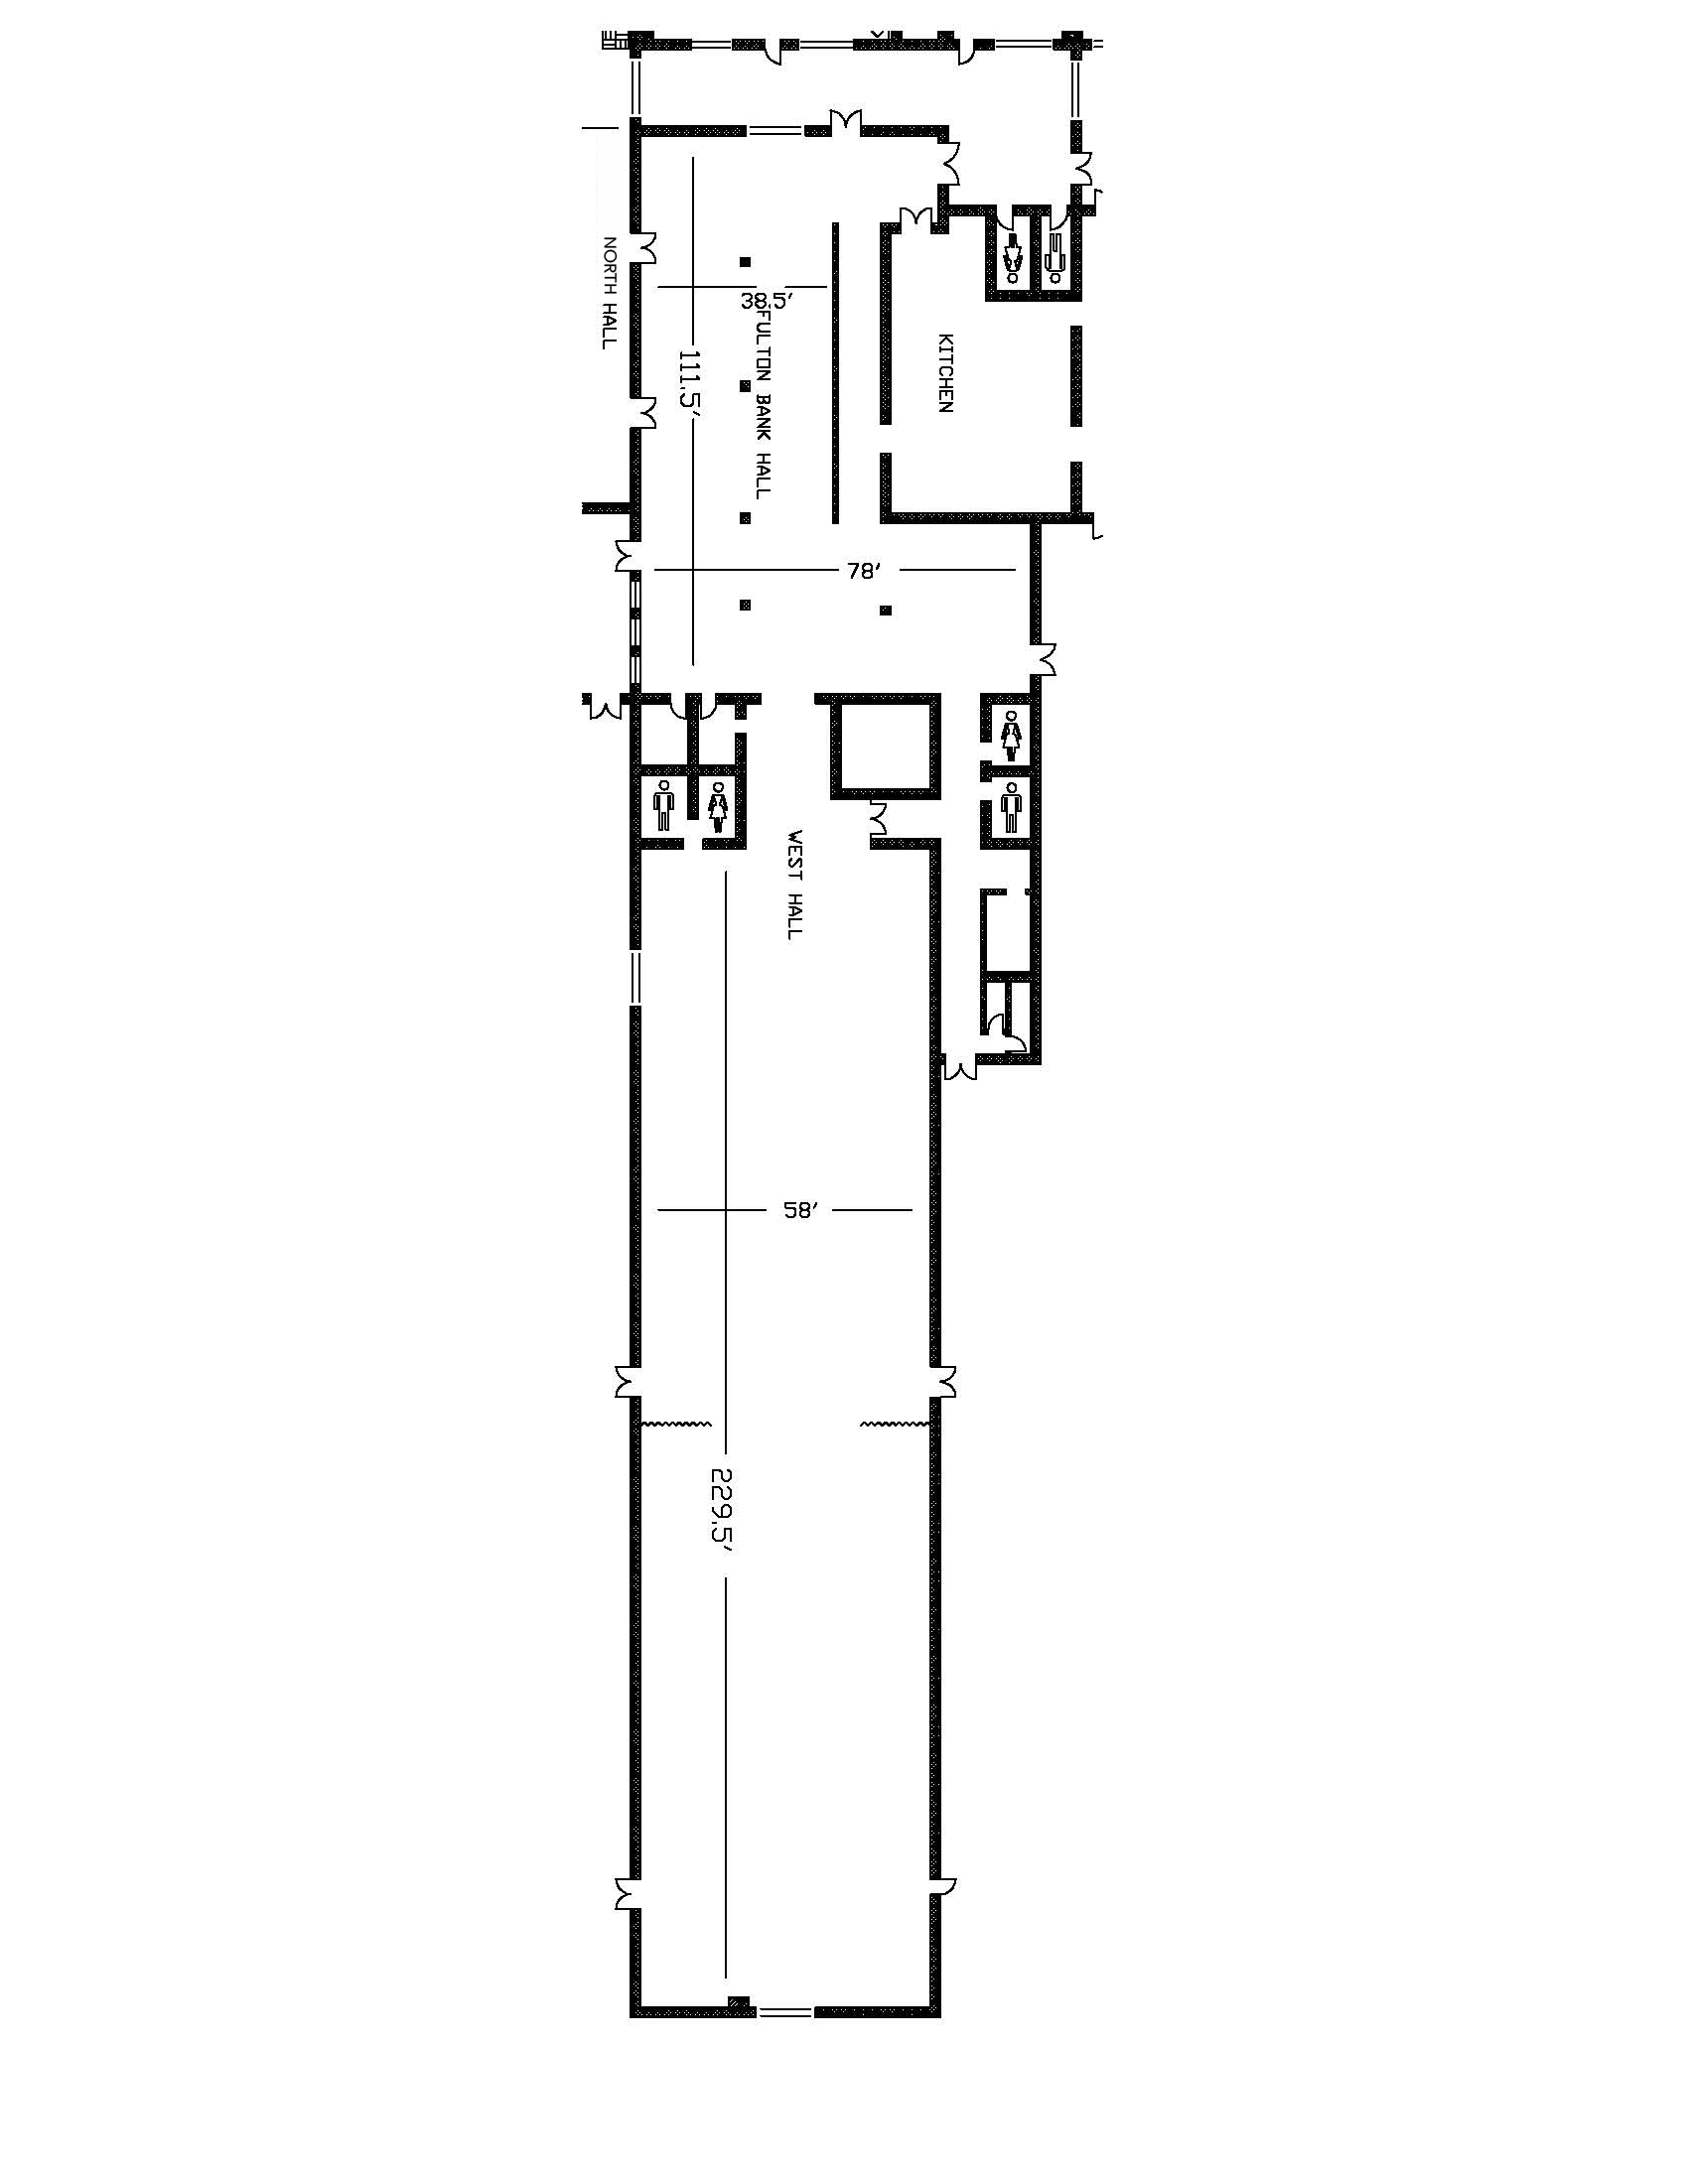 West and Center Hall - Floor Plan